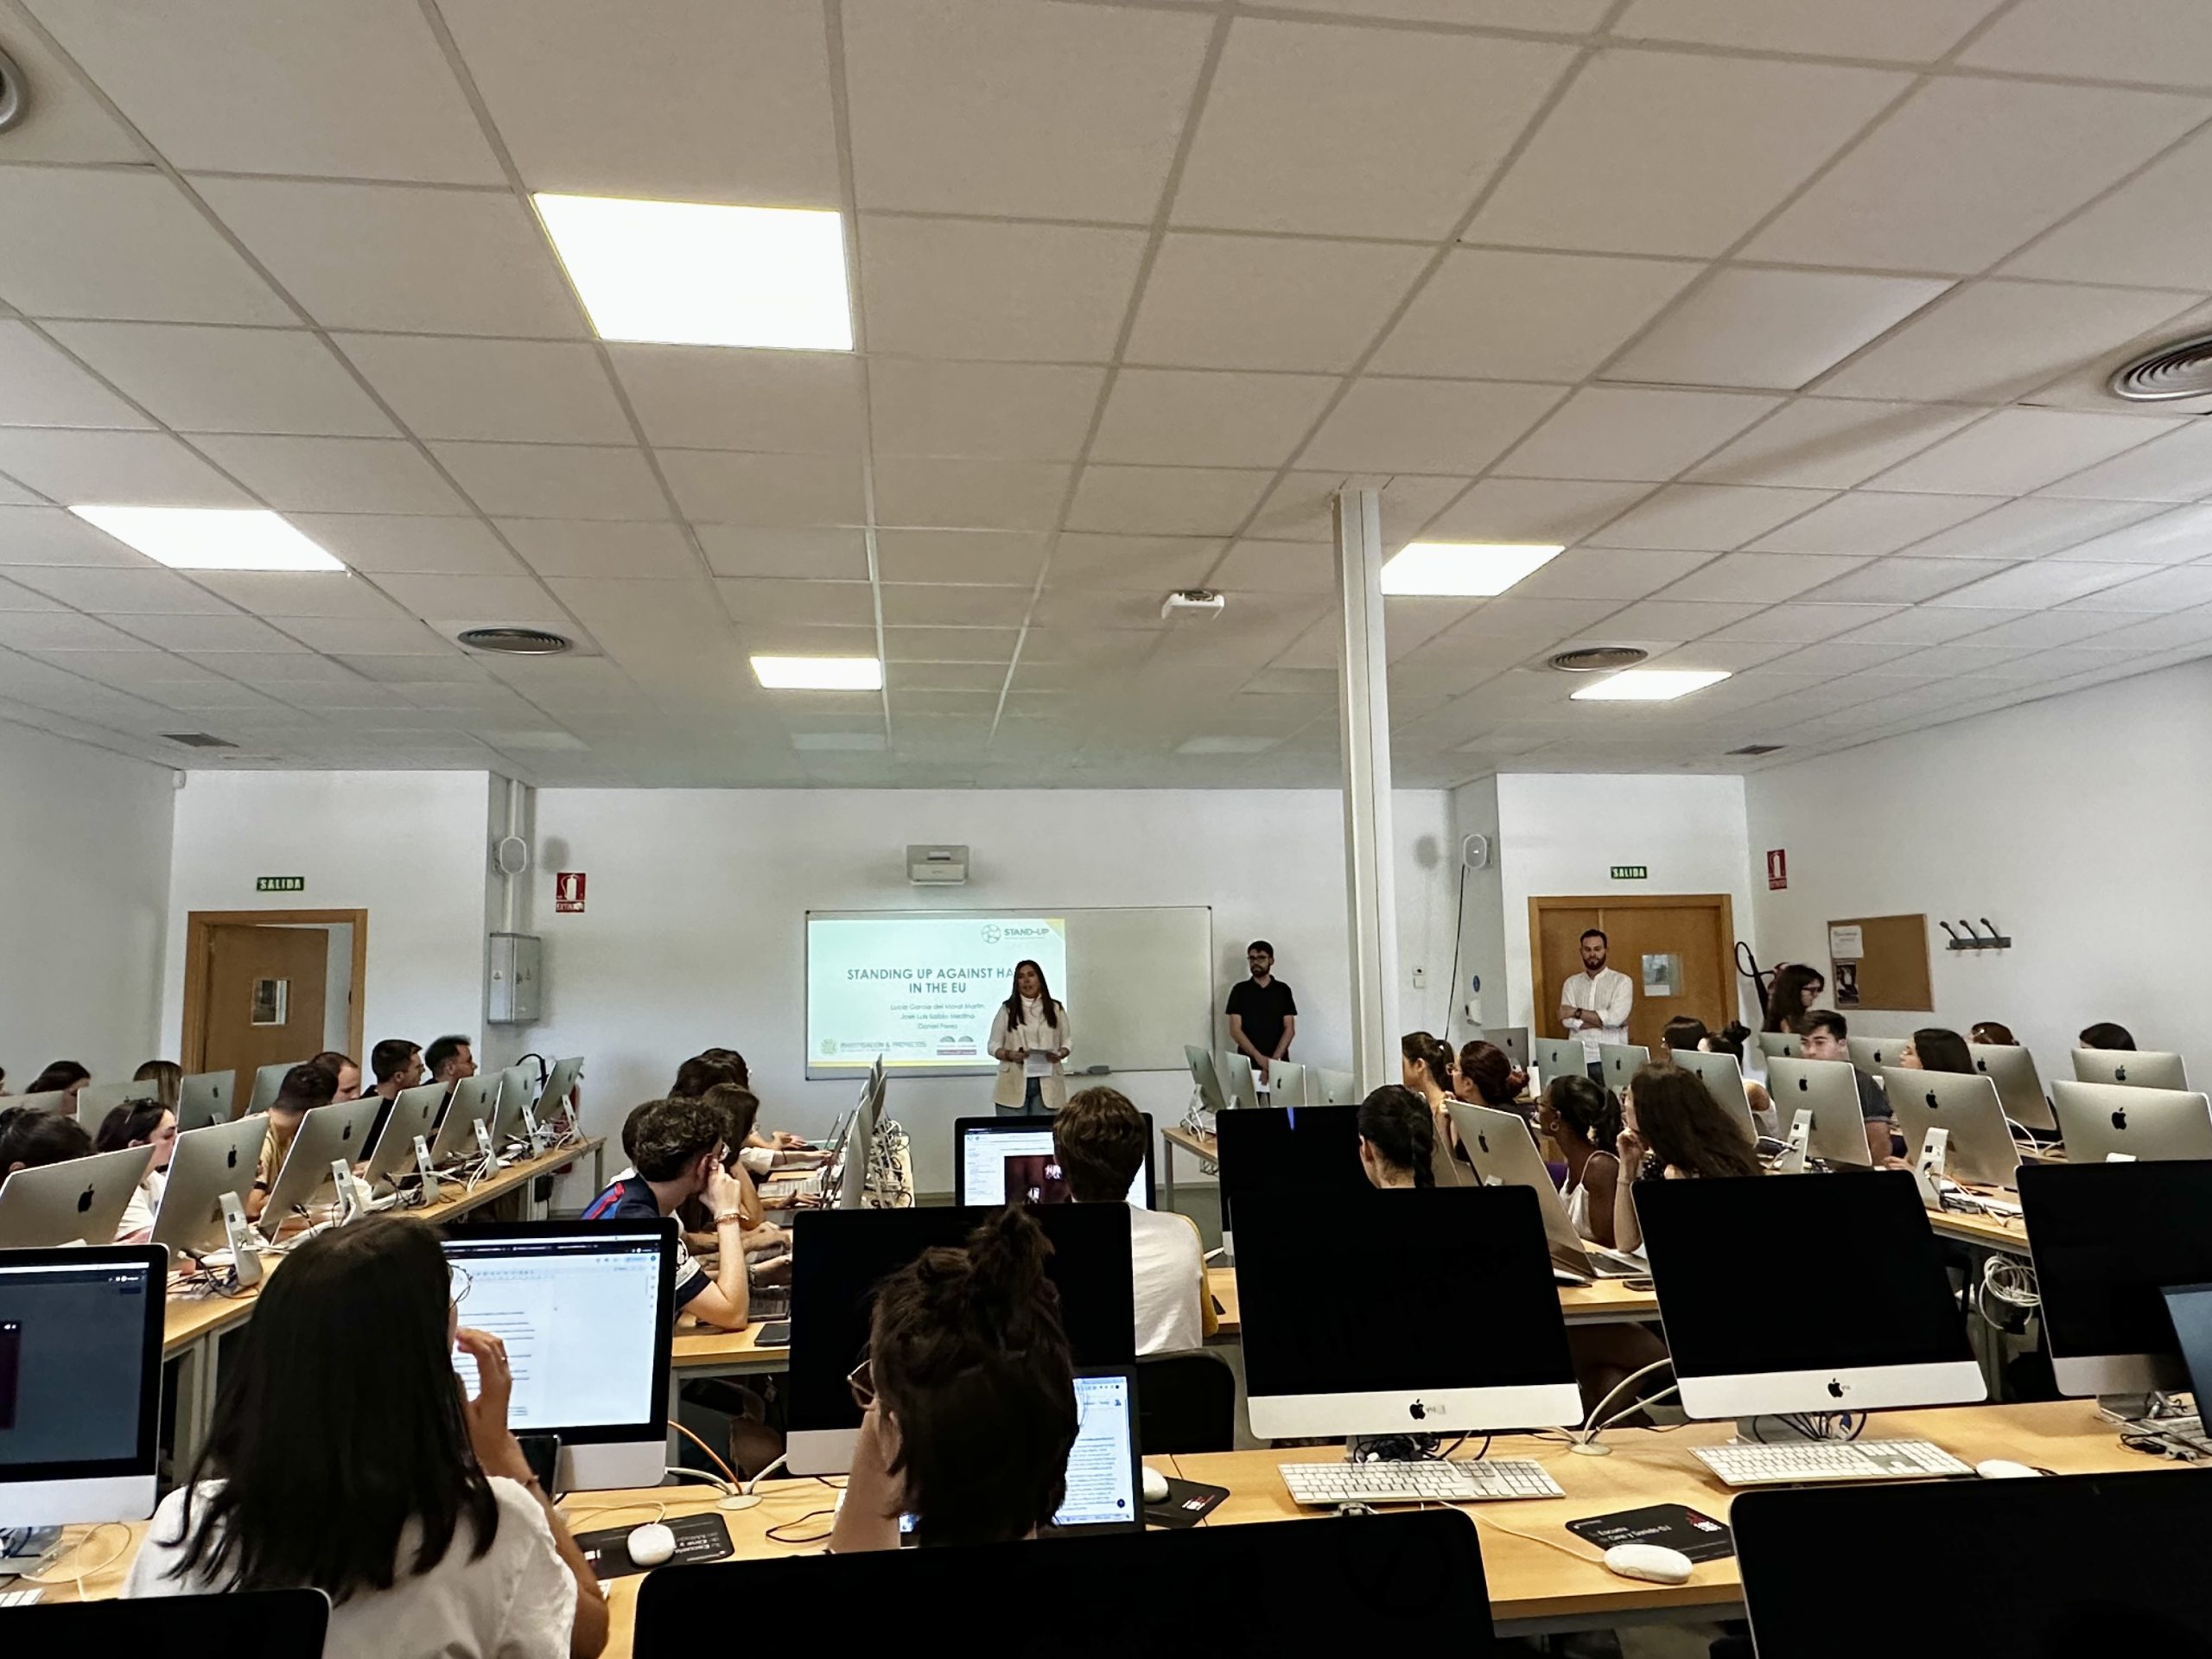 One of the training sessions given at the University of Malaga